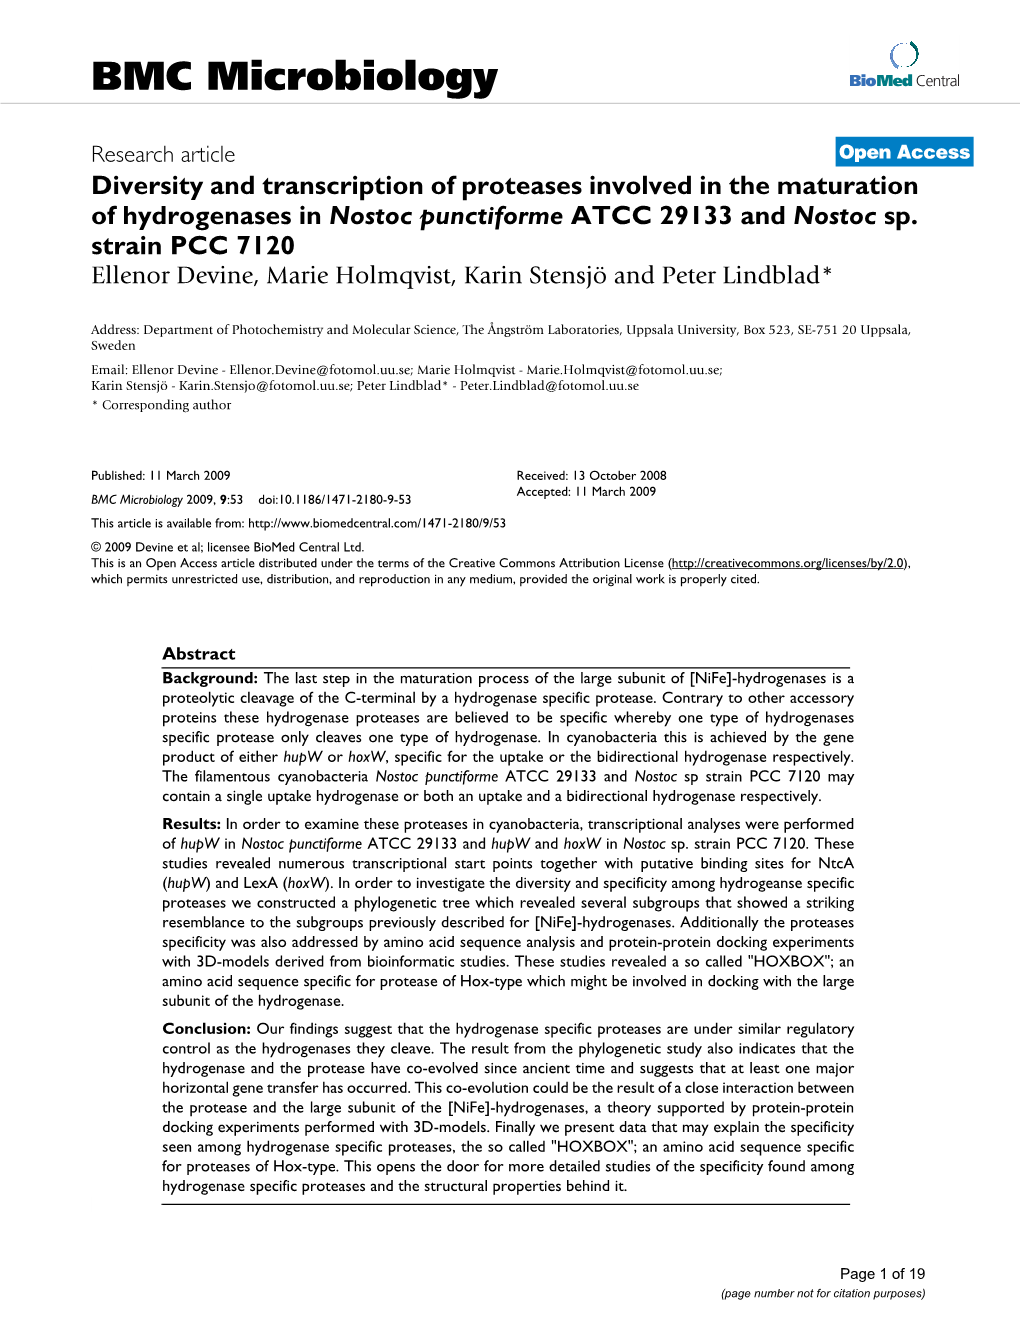 Diversity and Transcription of Proteases Involved in the Maturation of Hydrogenases in Nostoc Punctiforme ATCC 29133 and Nostoc Sp